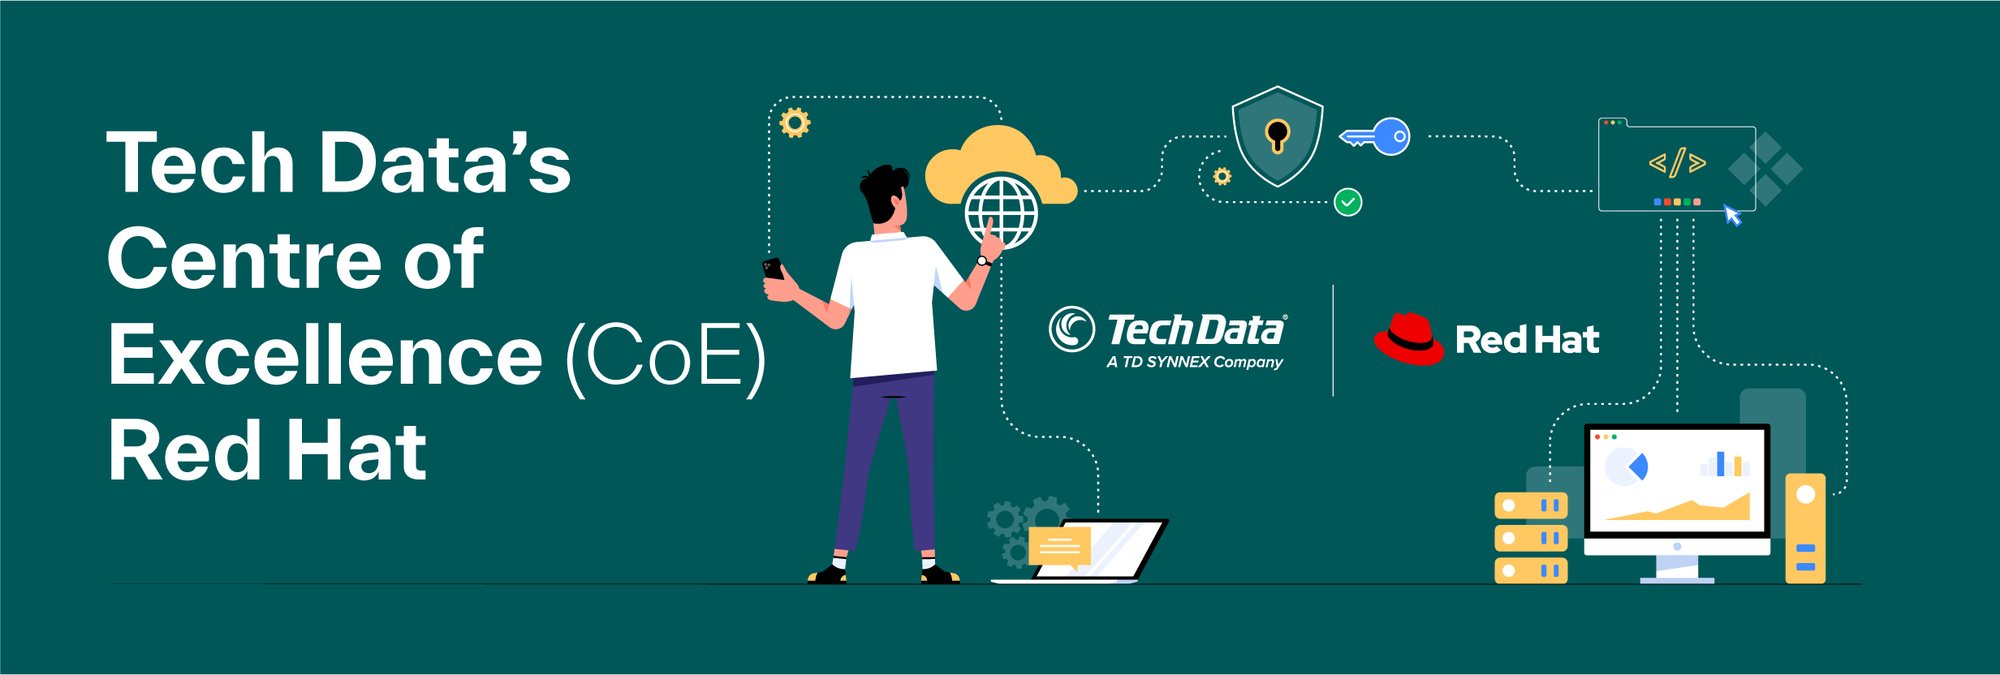 Tech-Data-Centre-of-Excellence-Red-Hat-eDM-Banner